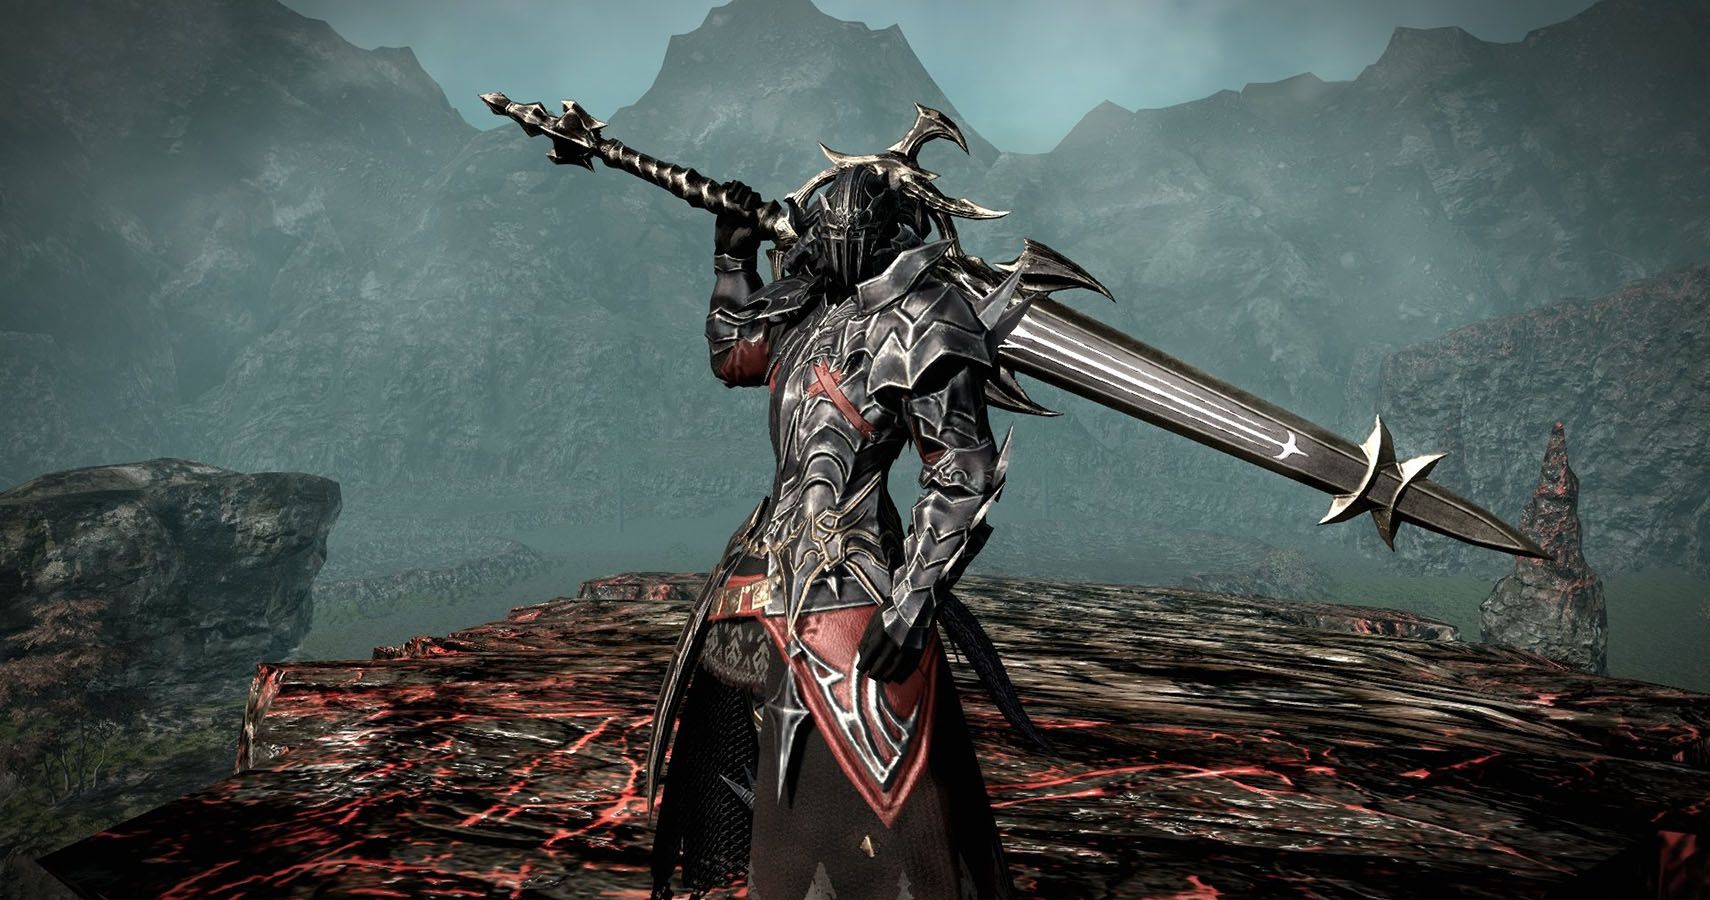 Final Fantasy Xiv Job Guide 10 Pro Tips For Playing A Dark Knight